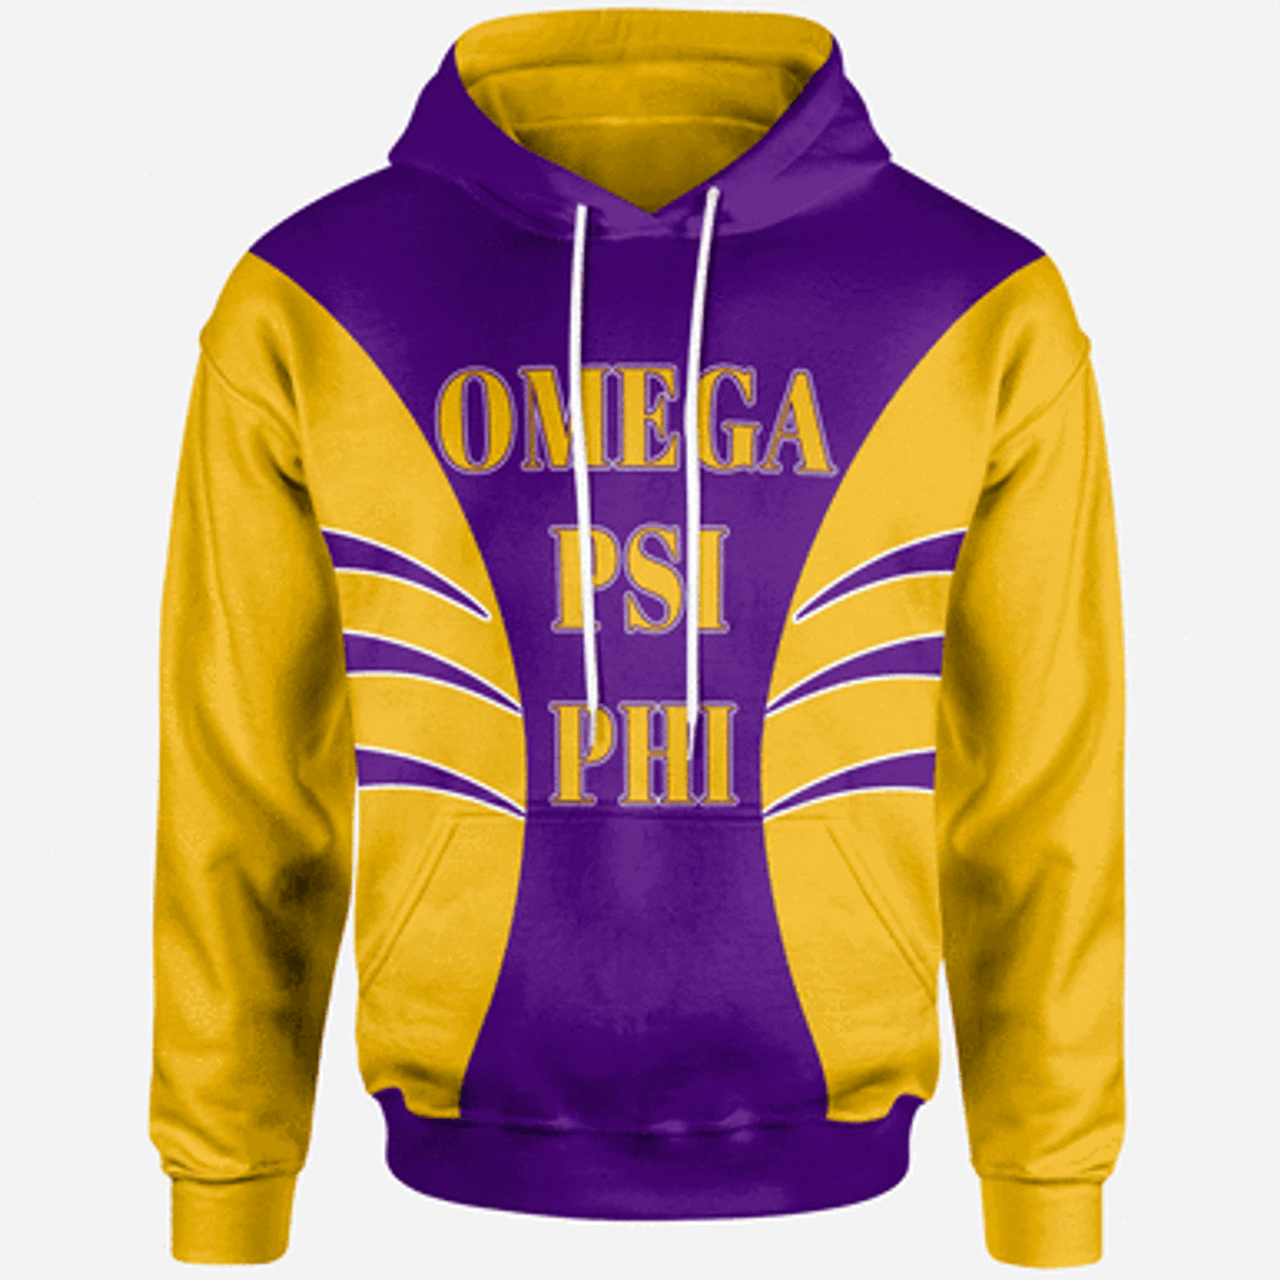 Omega Psi Phi Hoodie – Fraternity Claws Paw Style Hoodie